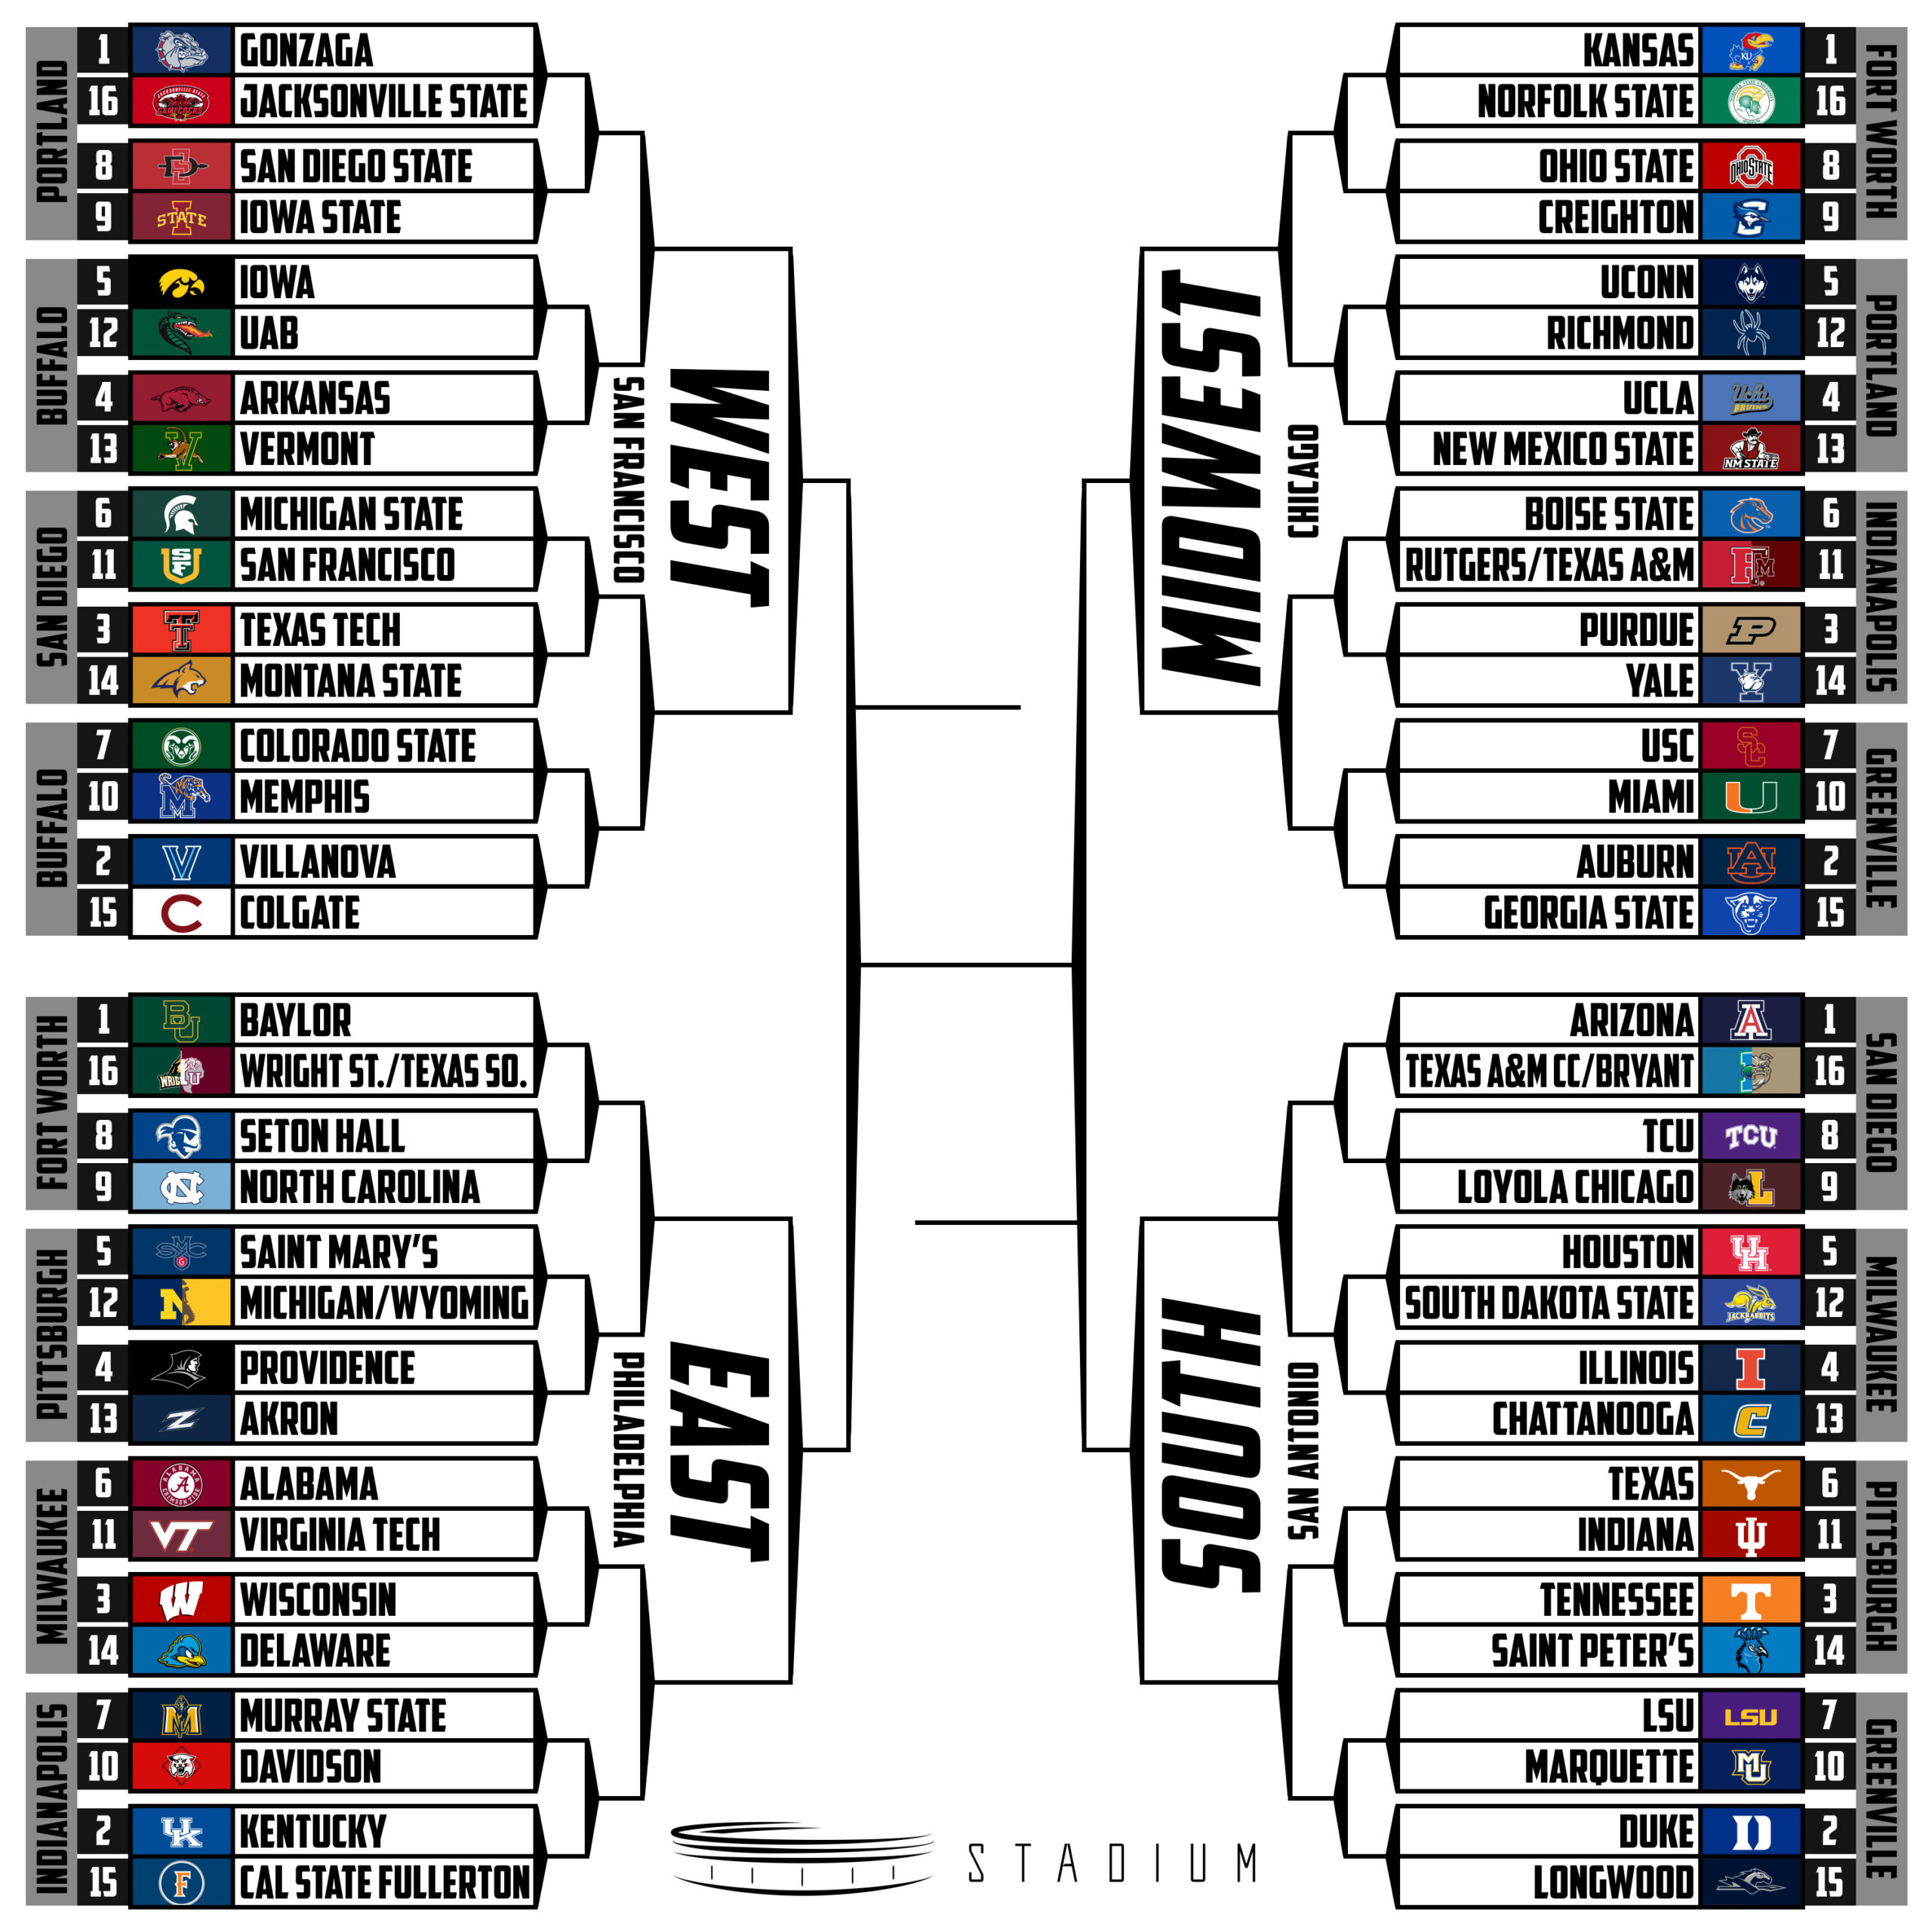 Stadiums Final 2022 NCAA Tournament Projections